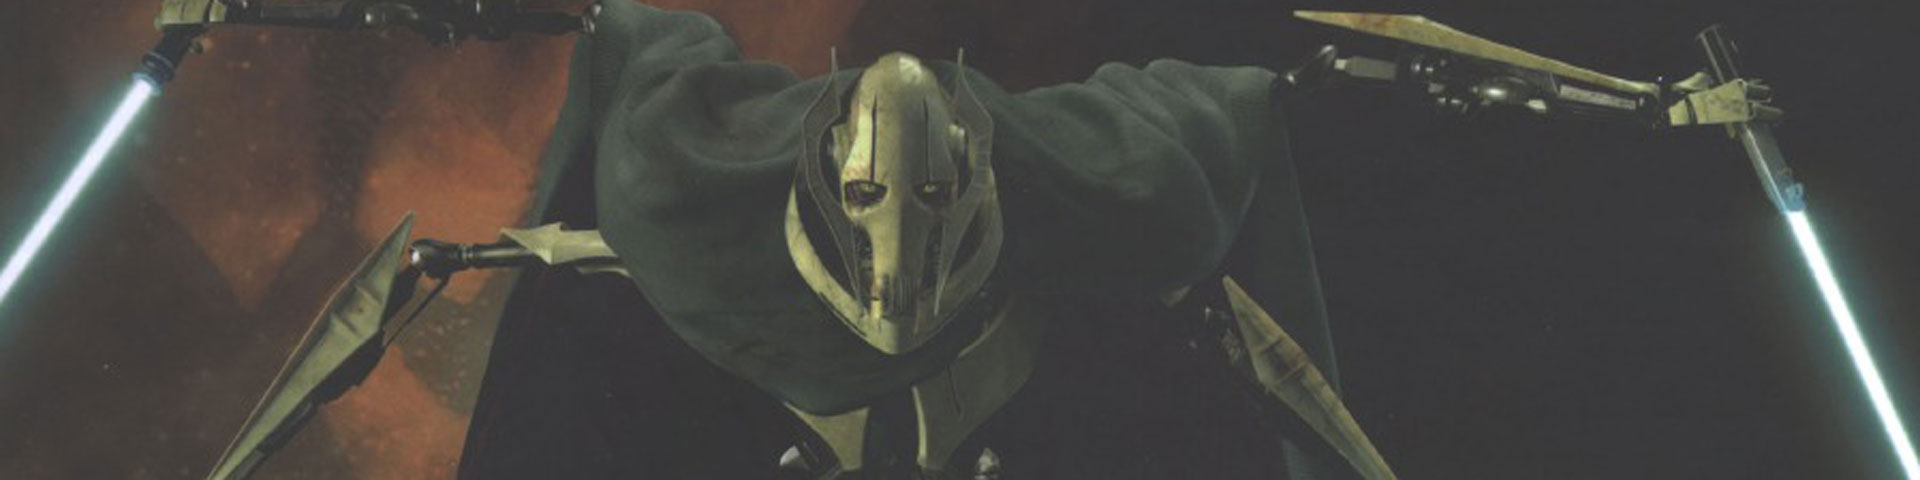 General Grievous -- a four-armed robot -- stares out at the reader.